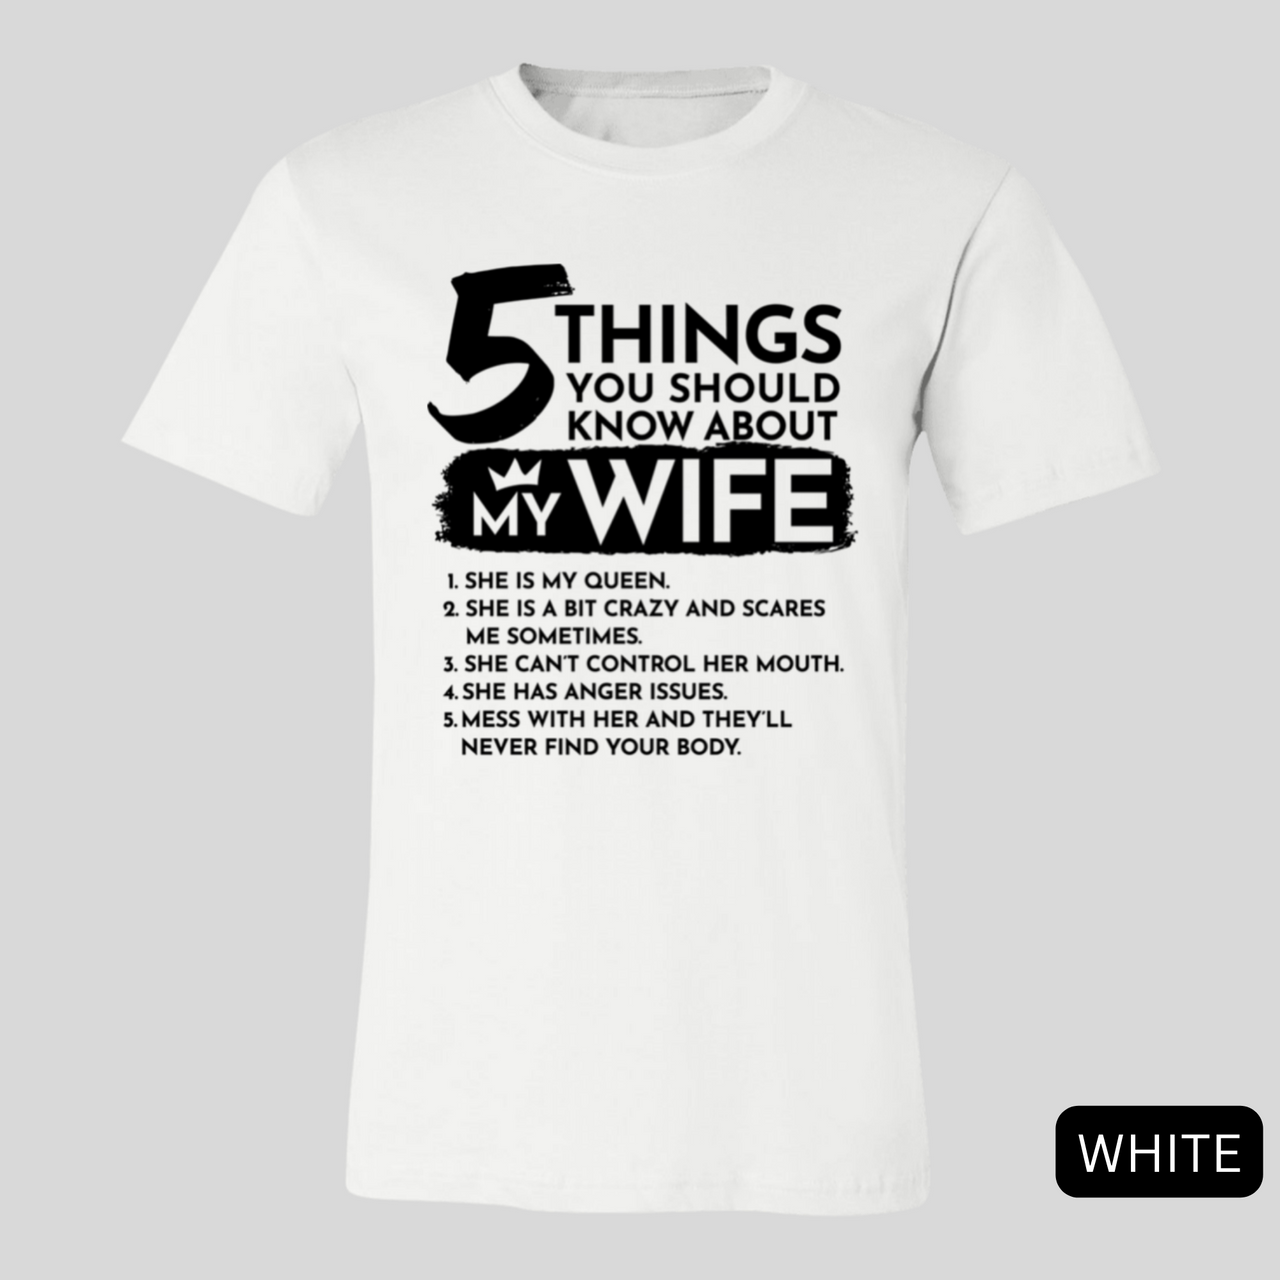 5 things you should know about my wife white shirt